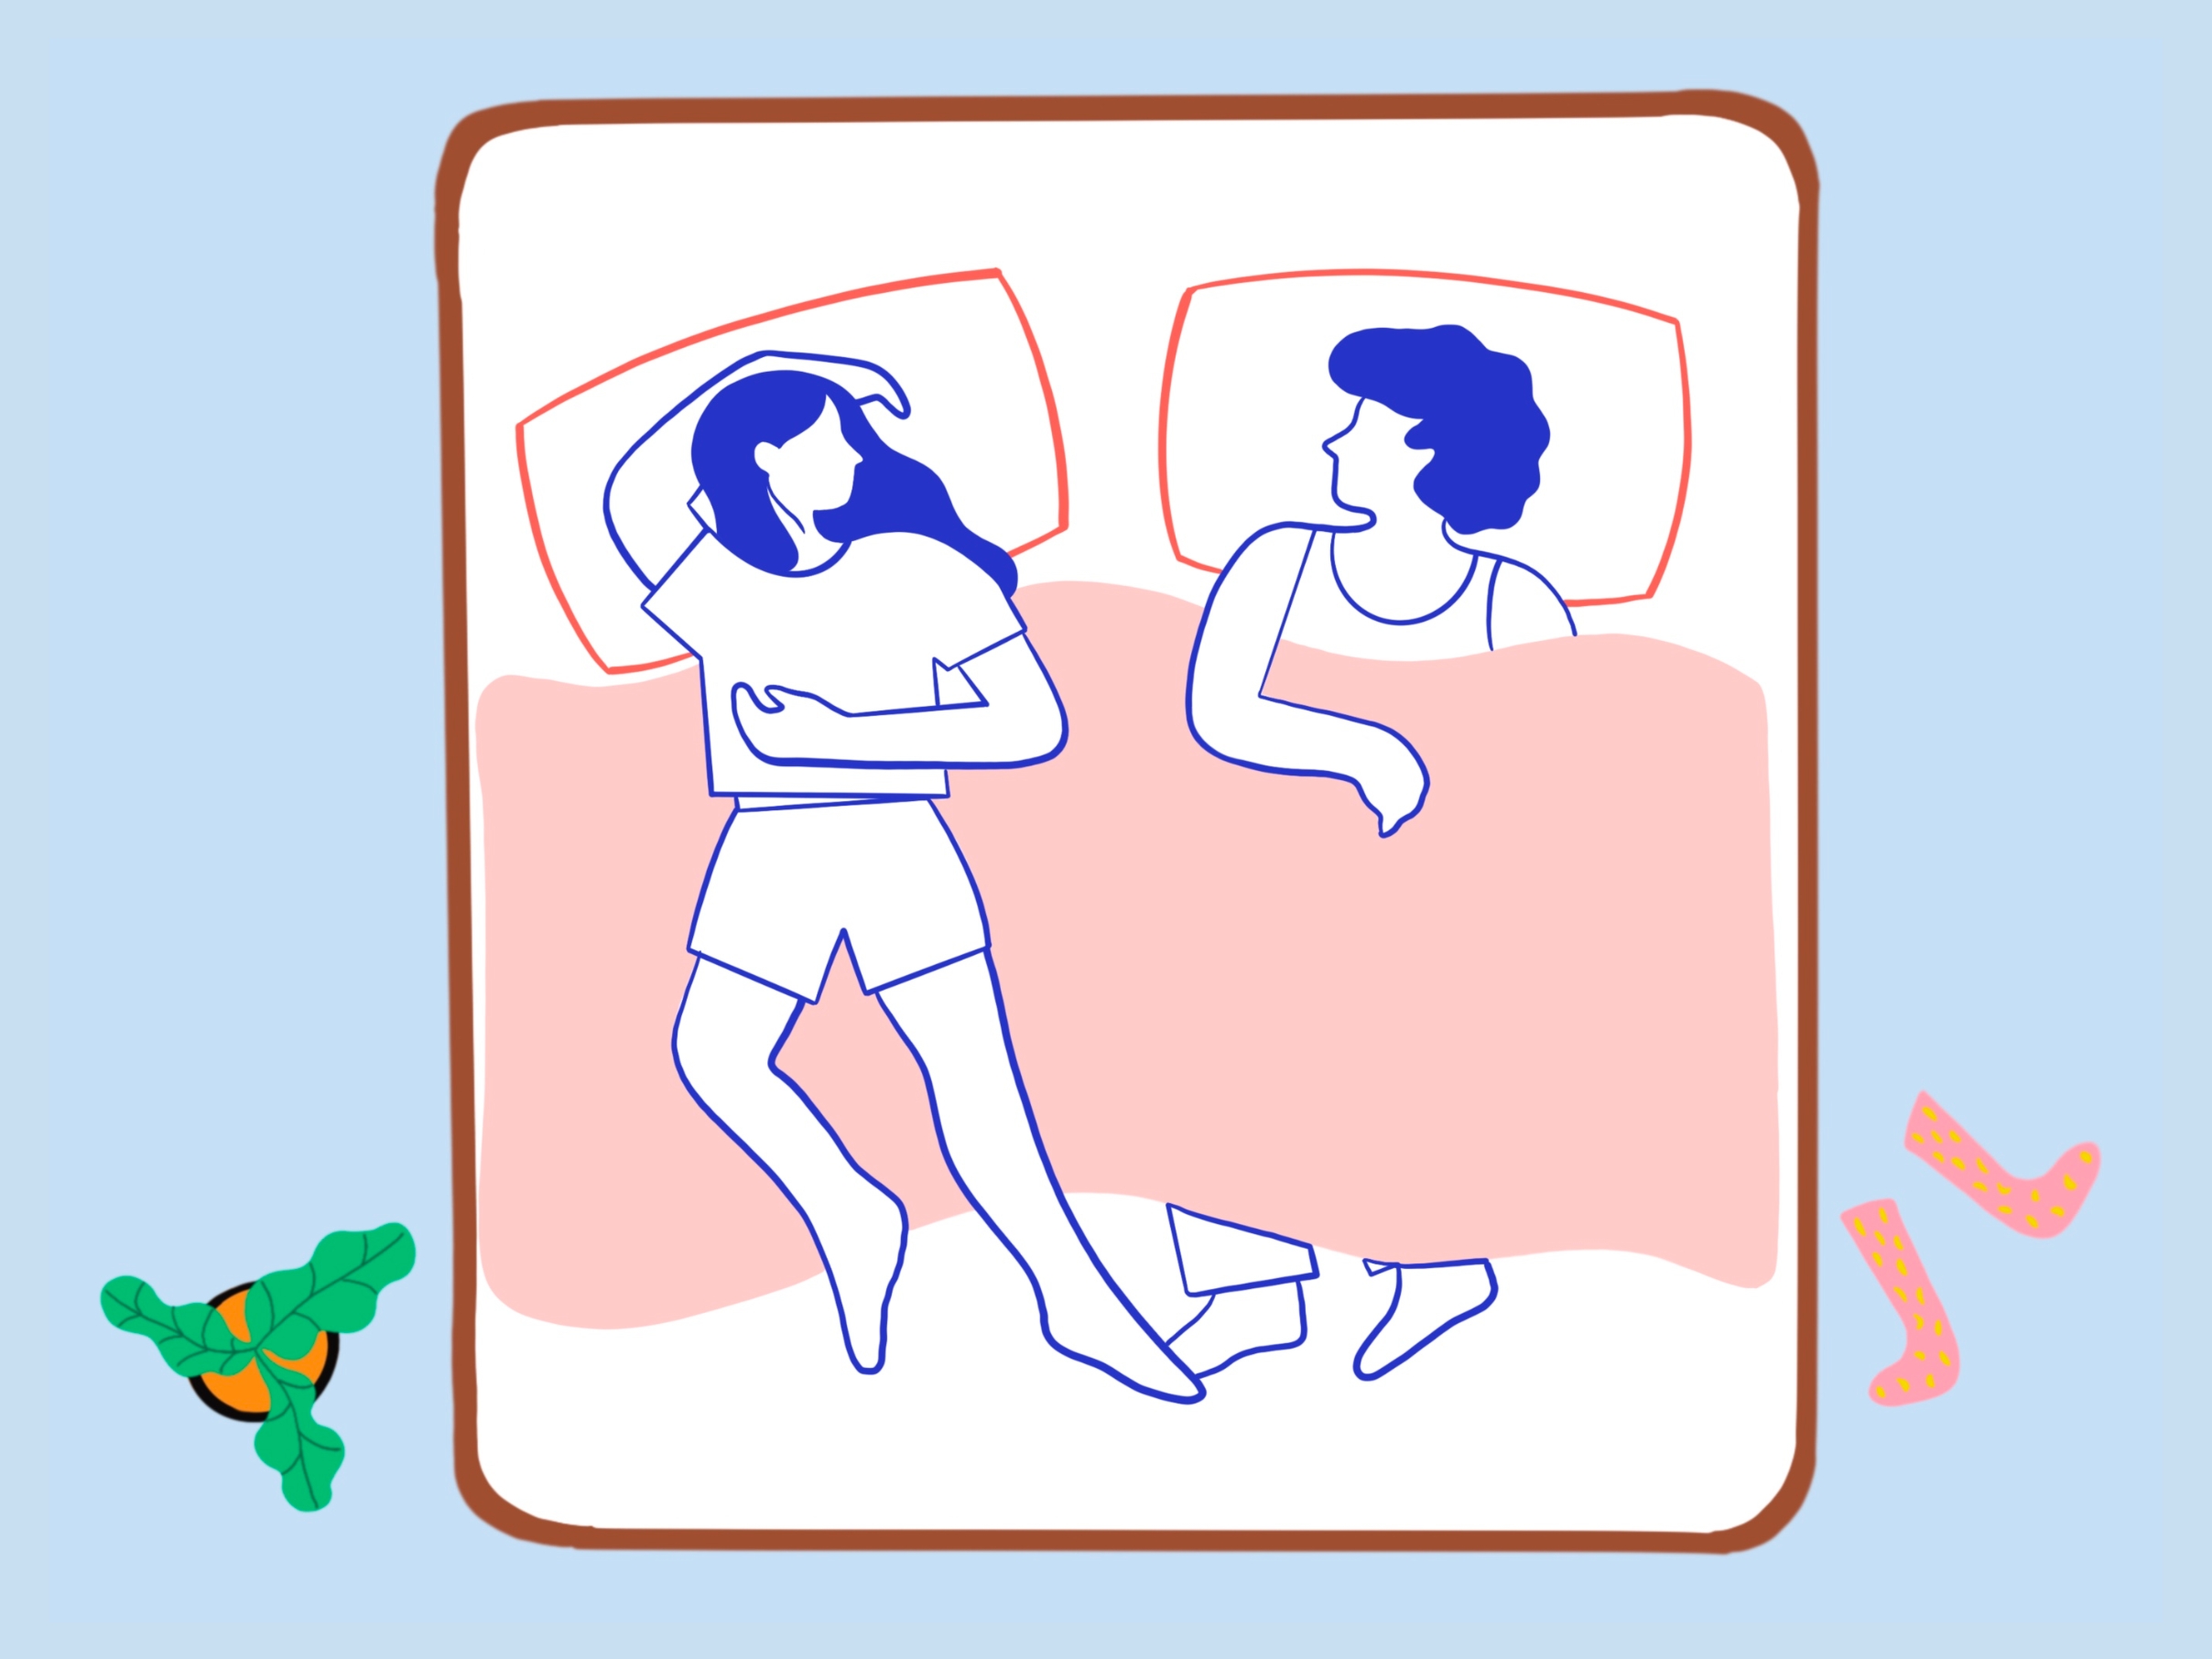 12 Common Couple Sleeping Positions And What They Mean | Couples sleeping  positions, Couple sleeping, Sleeping positions